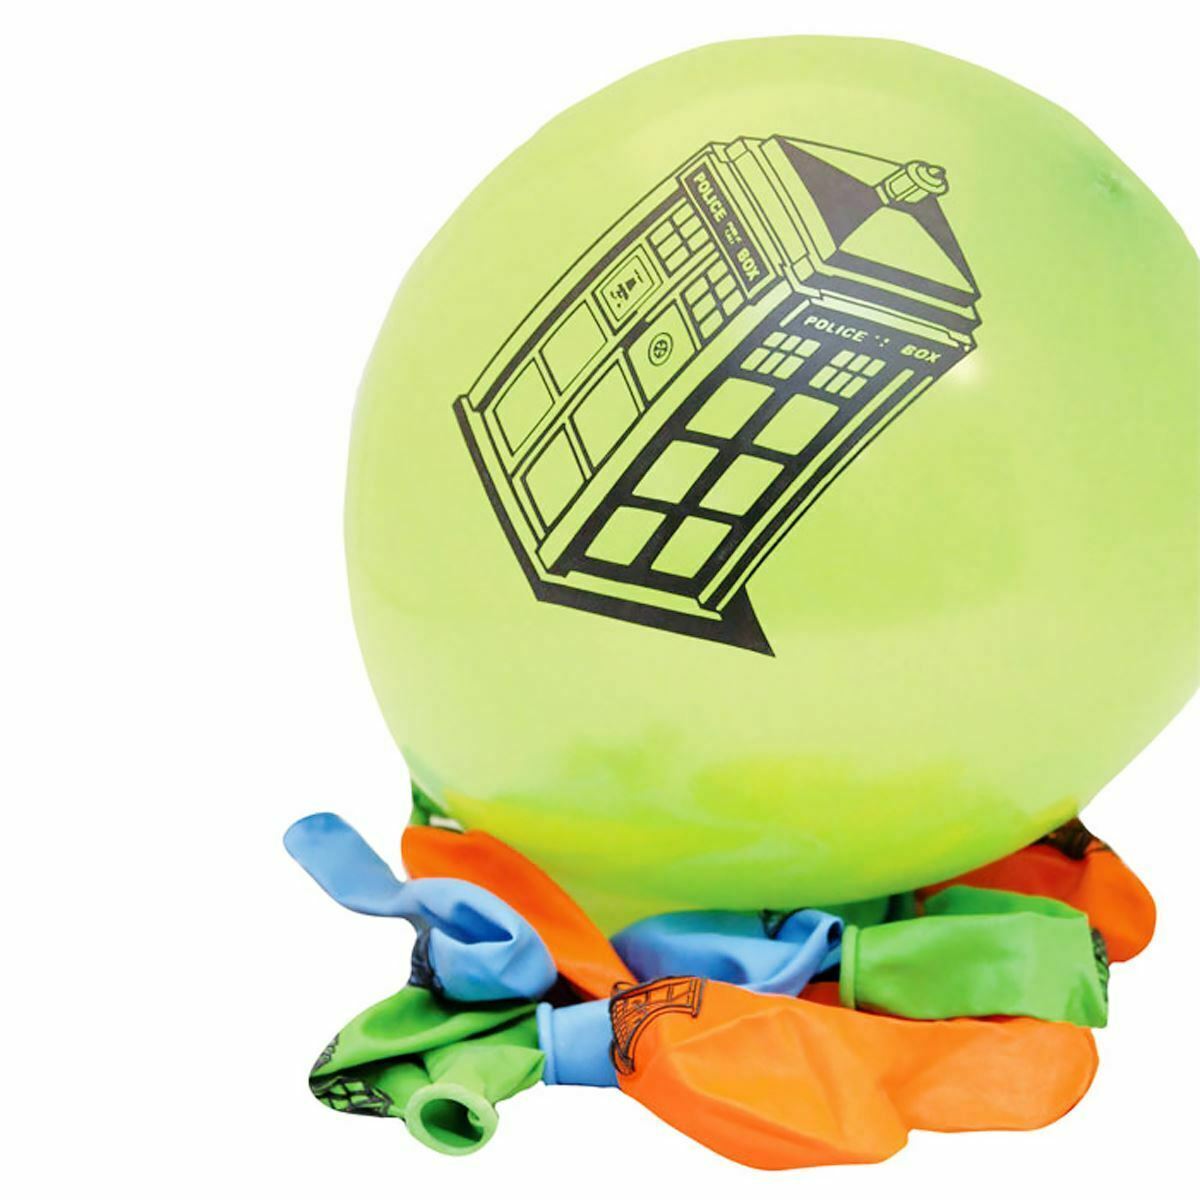 10 PACKS Doctor Who TARDIS Balloons 10 Pack Birthday Party Supplies Official